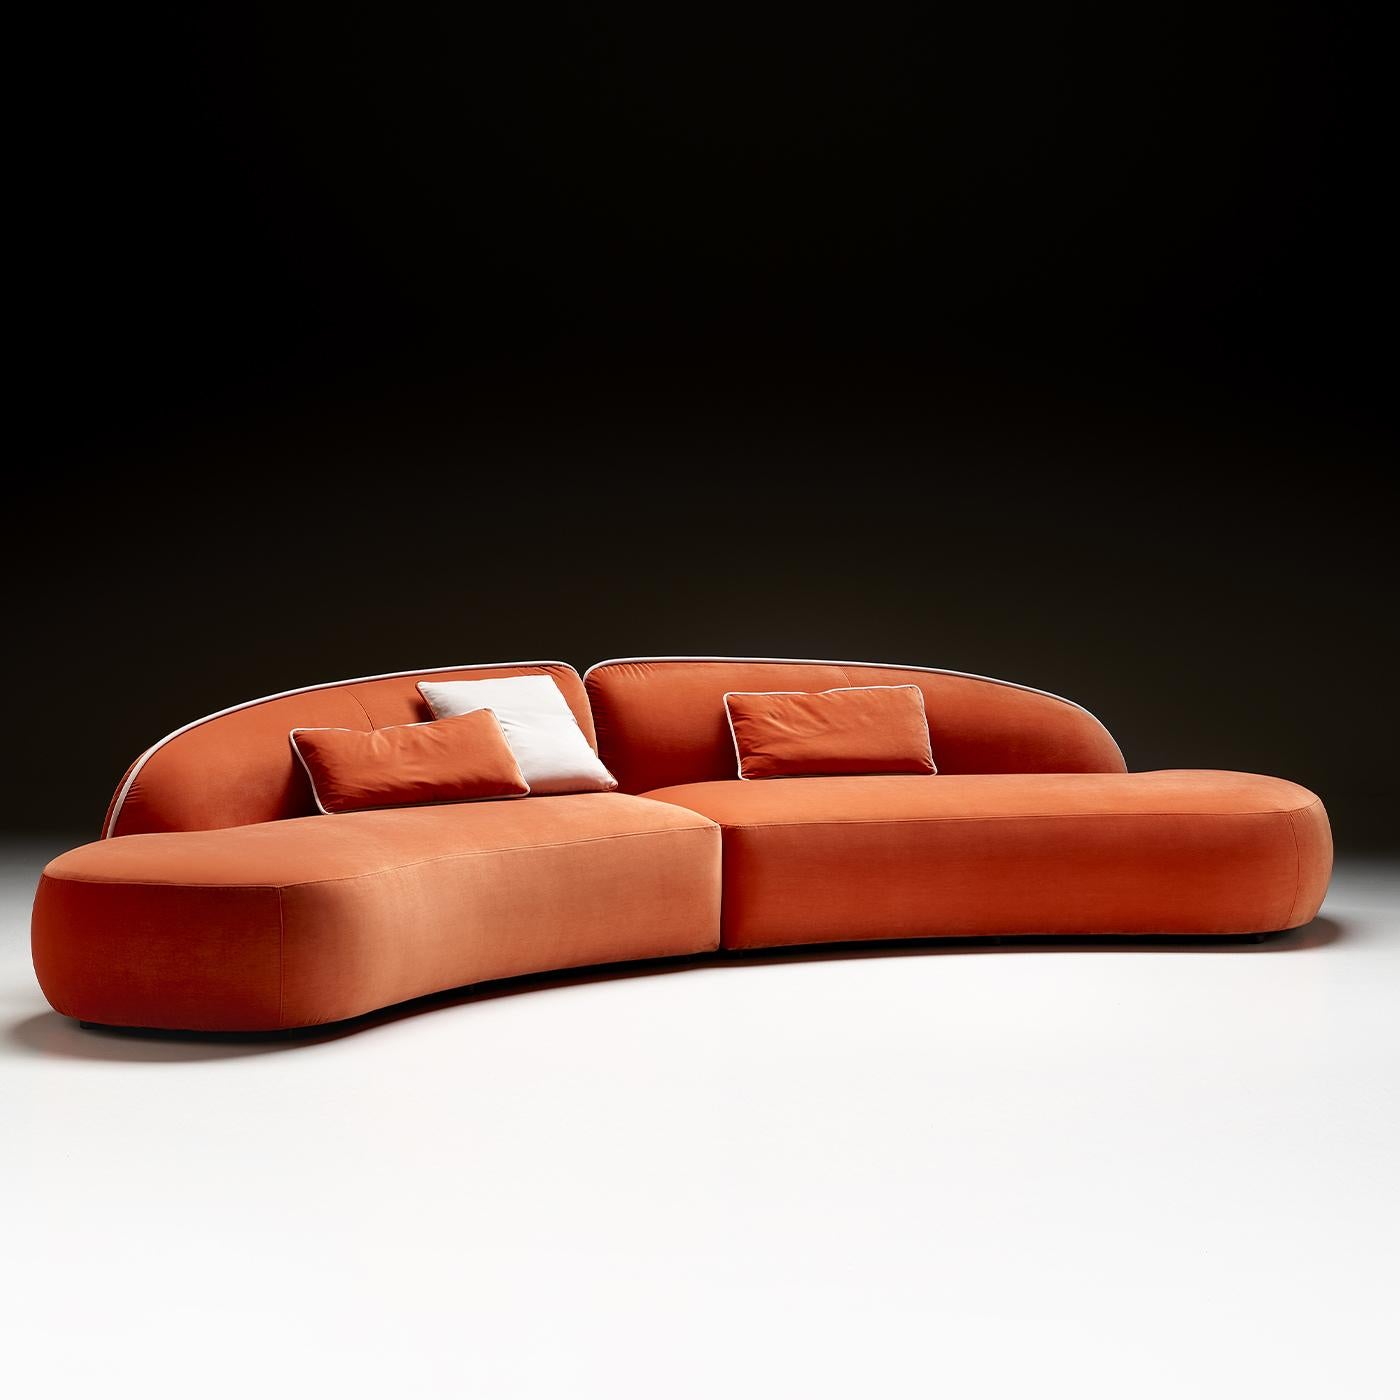 A modular sofa with enveloping and sinuous shapes: Erasmo is a perfect synthesis of classic and modern lines, elegantly highlighted by the creasing of the armrest that discreetly follows the composition. The softness of the fabrics welcomes the